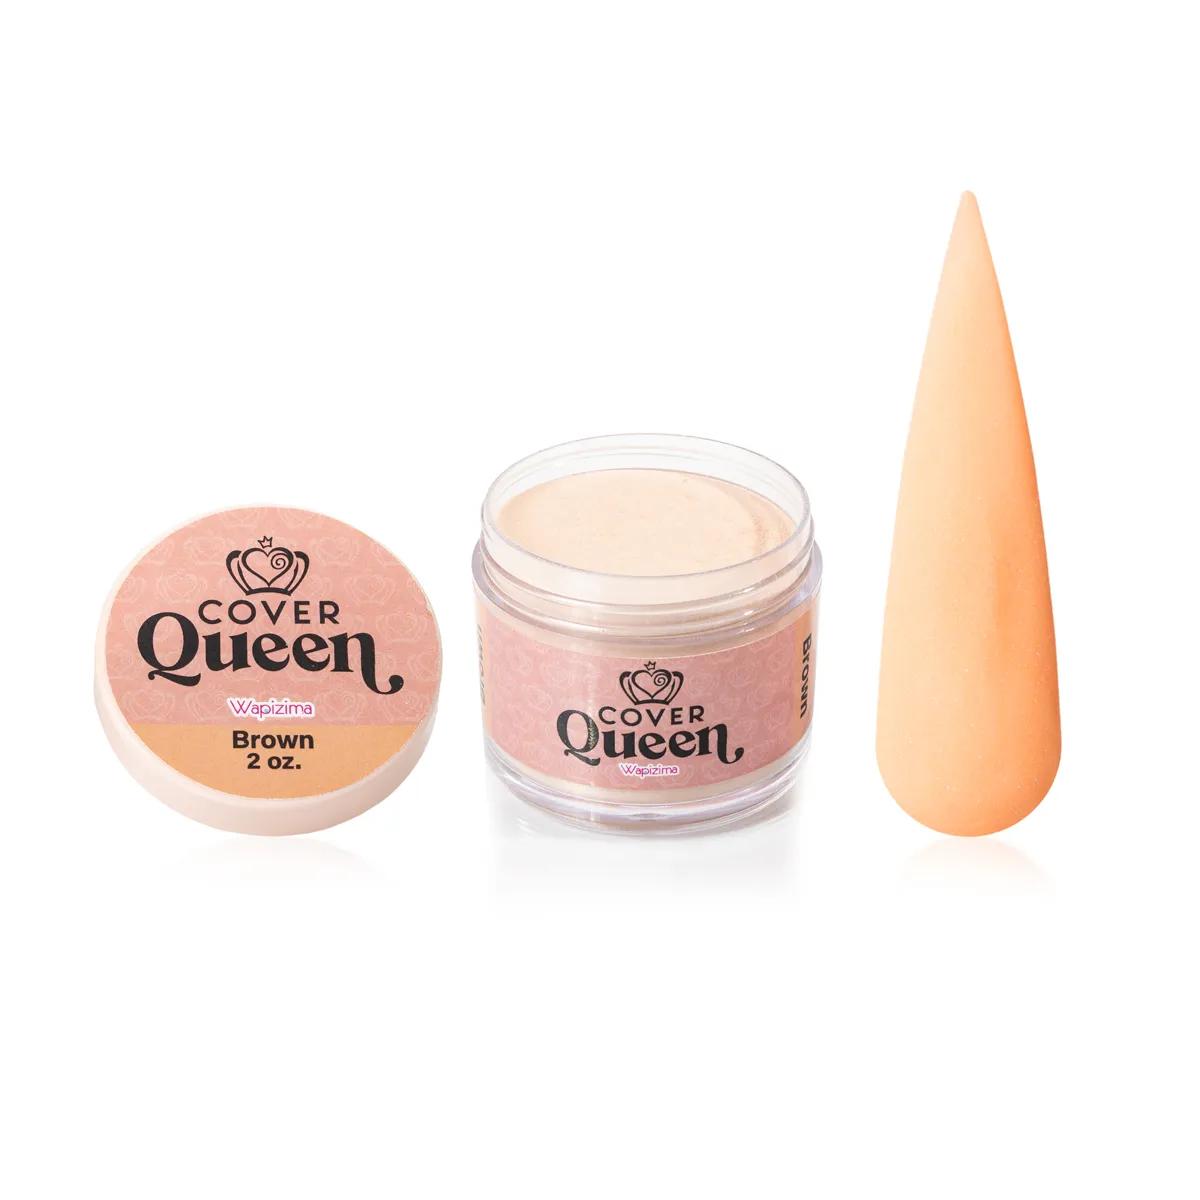 W.Cover Queen Brown 2 oz